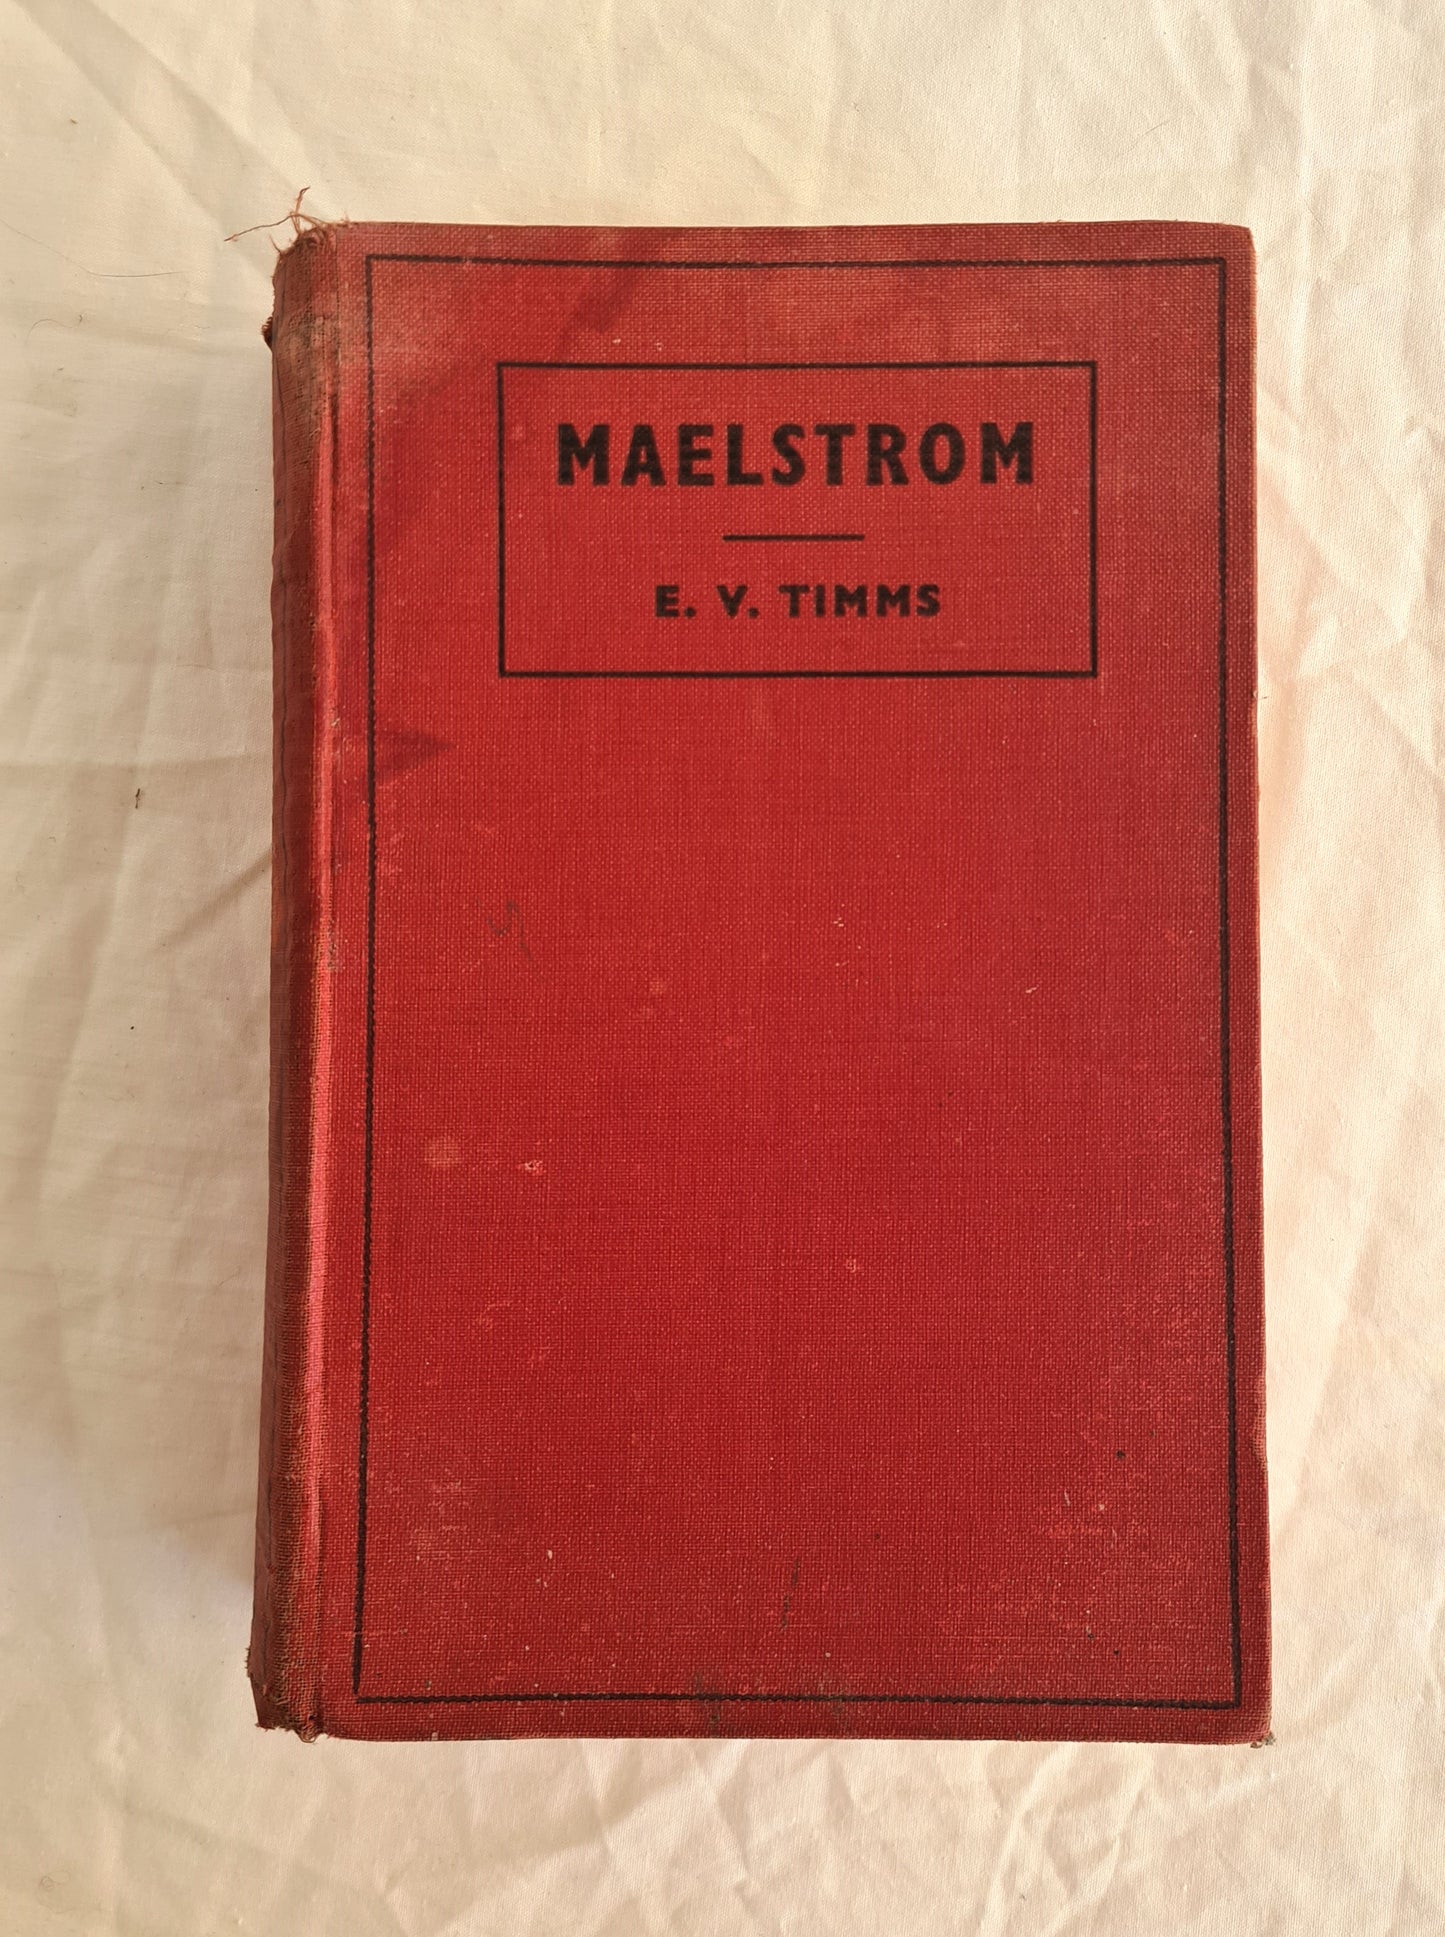 Maelstrom by E. V. Timms